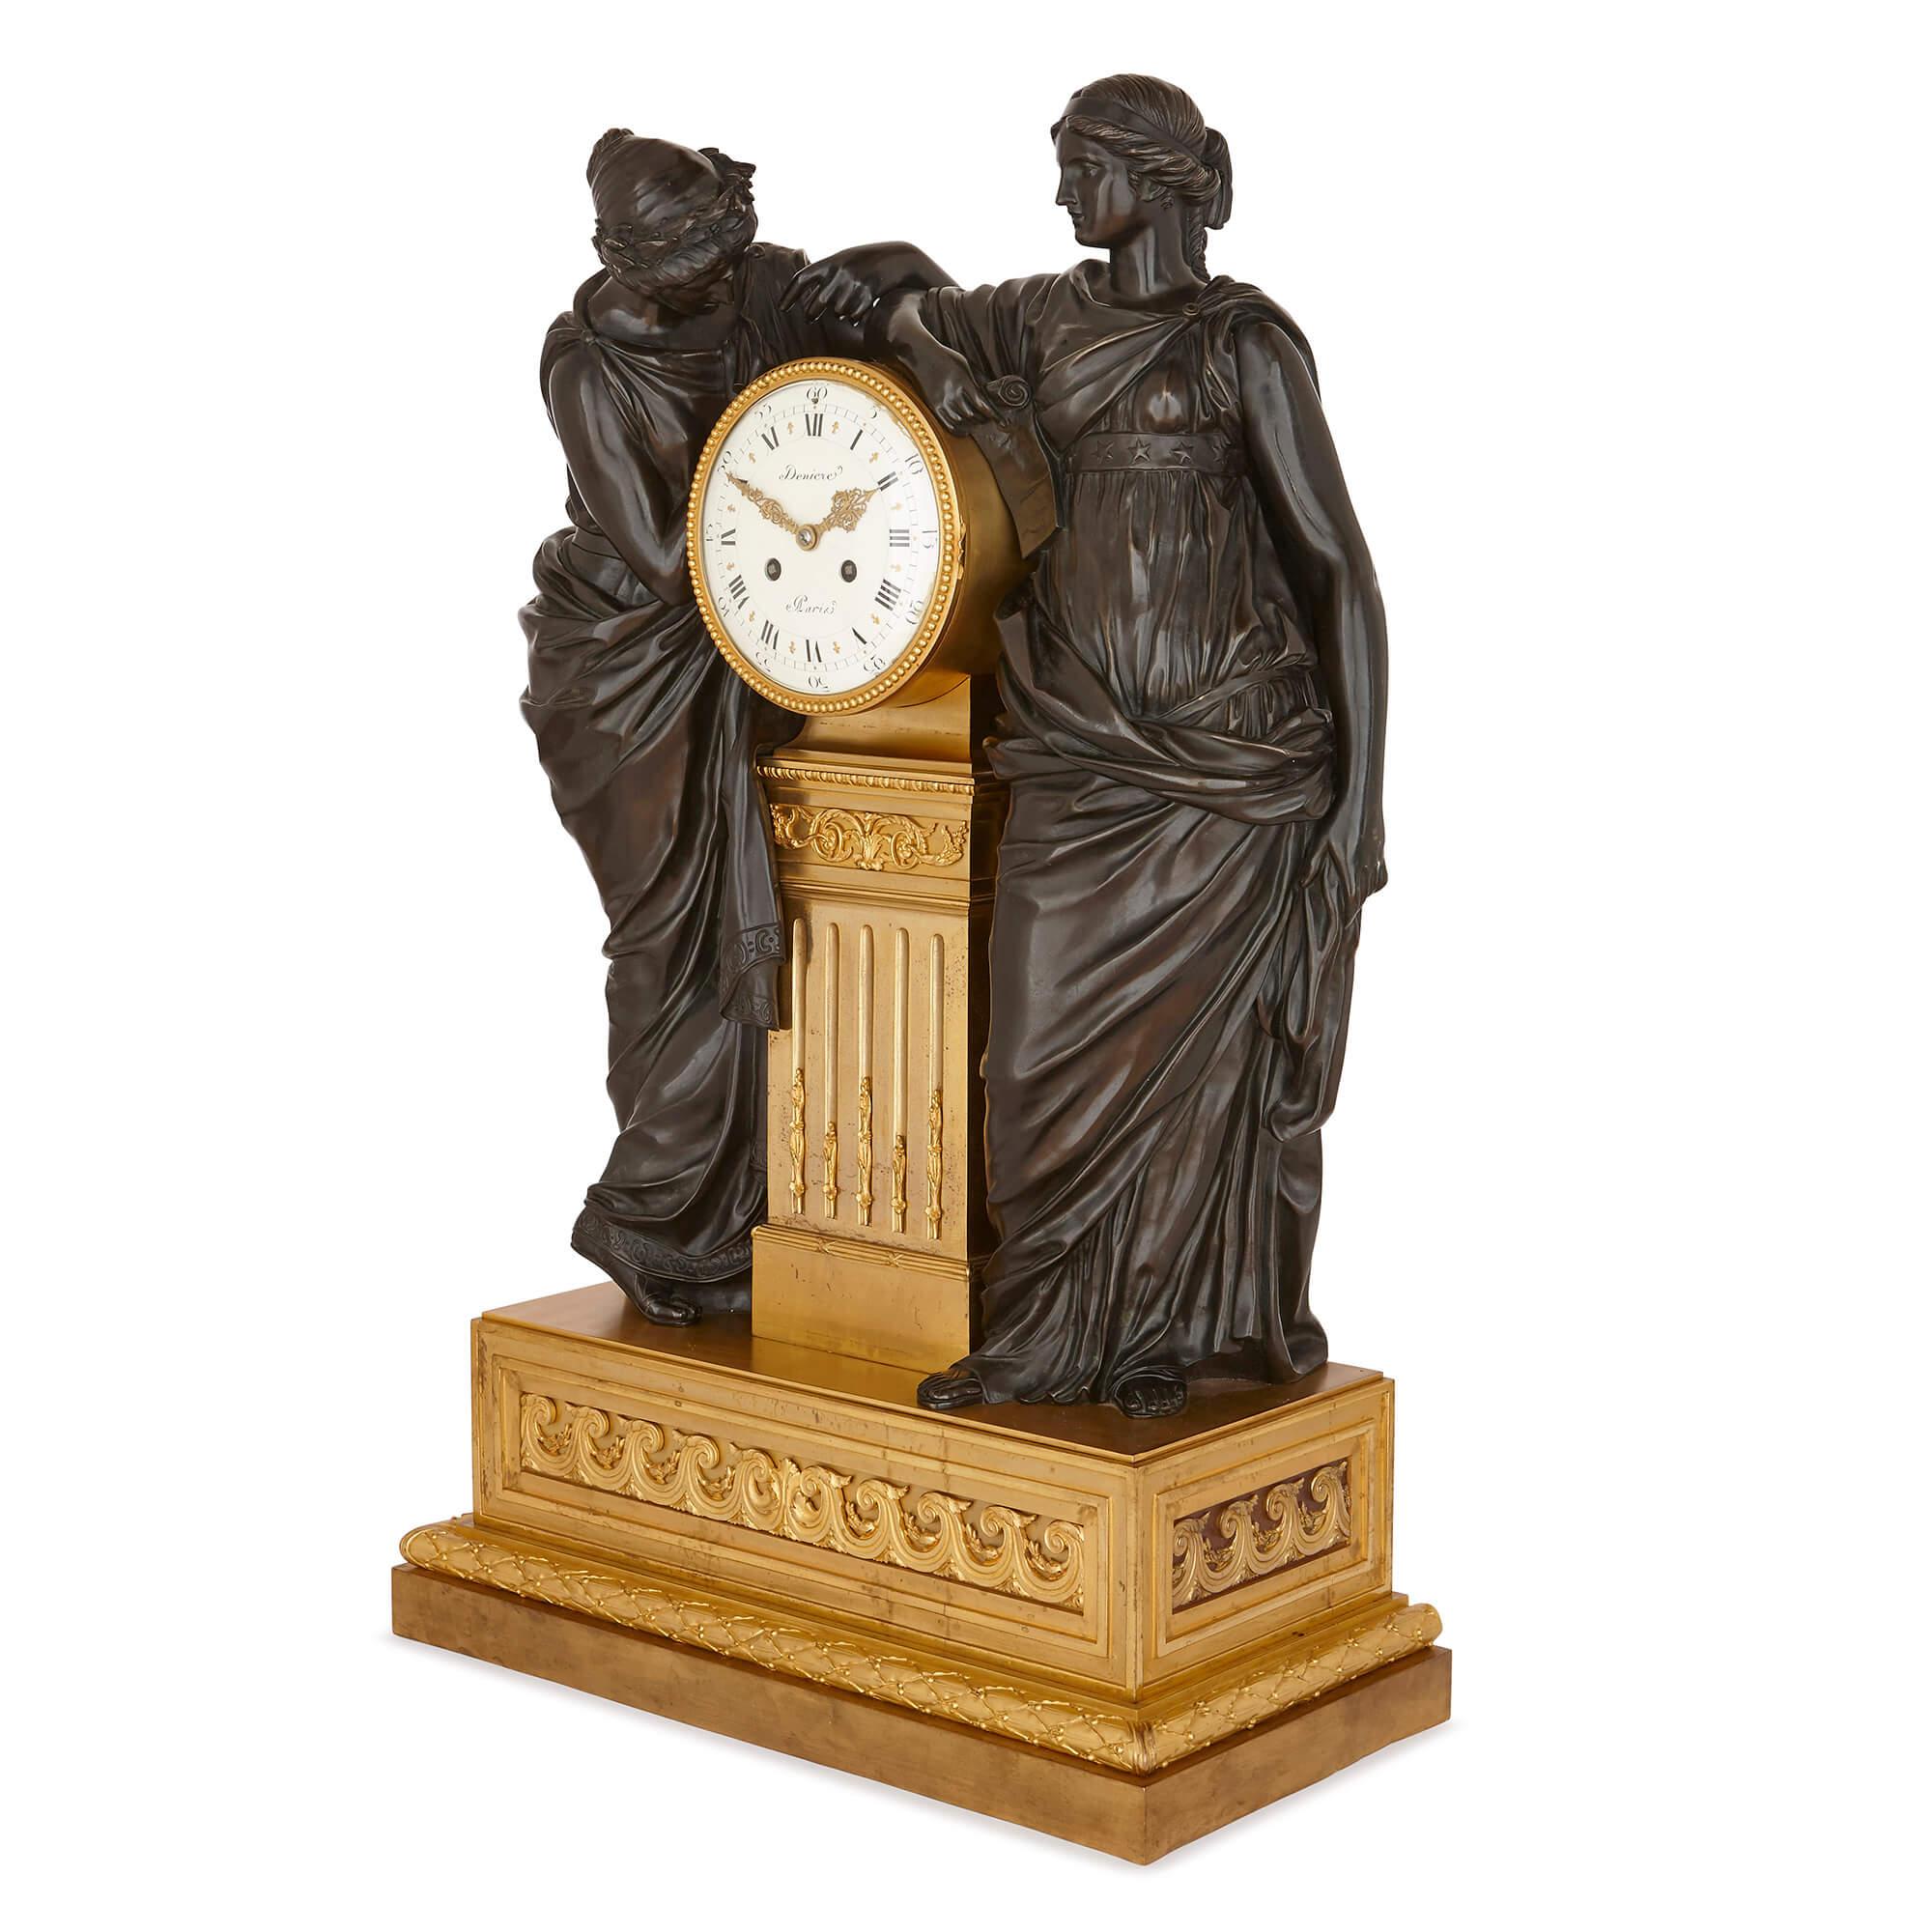 This large mantel clock is an excellent piece of refined neoclassical design by the acclaimed Deniere et Fils firm. Deniere was one of the leading practitioners of luxury bronzeware in Paris in the mid-19th century, and received commissions from